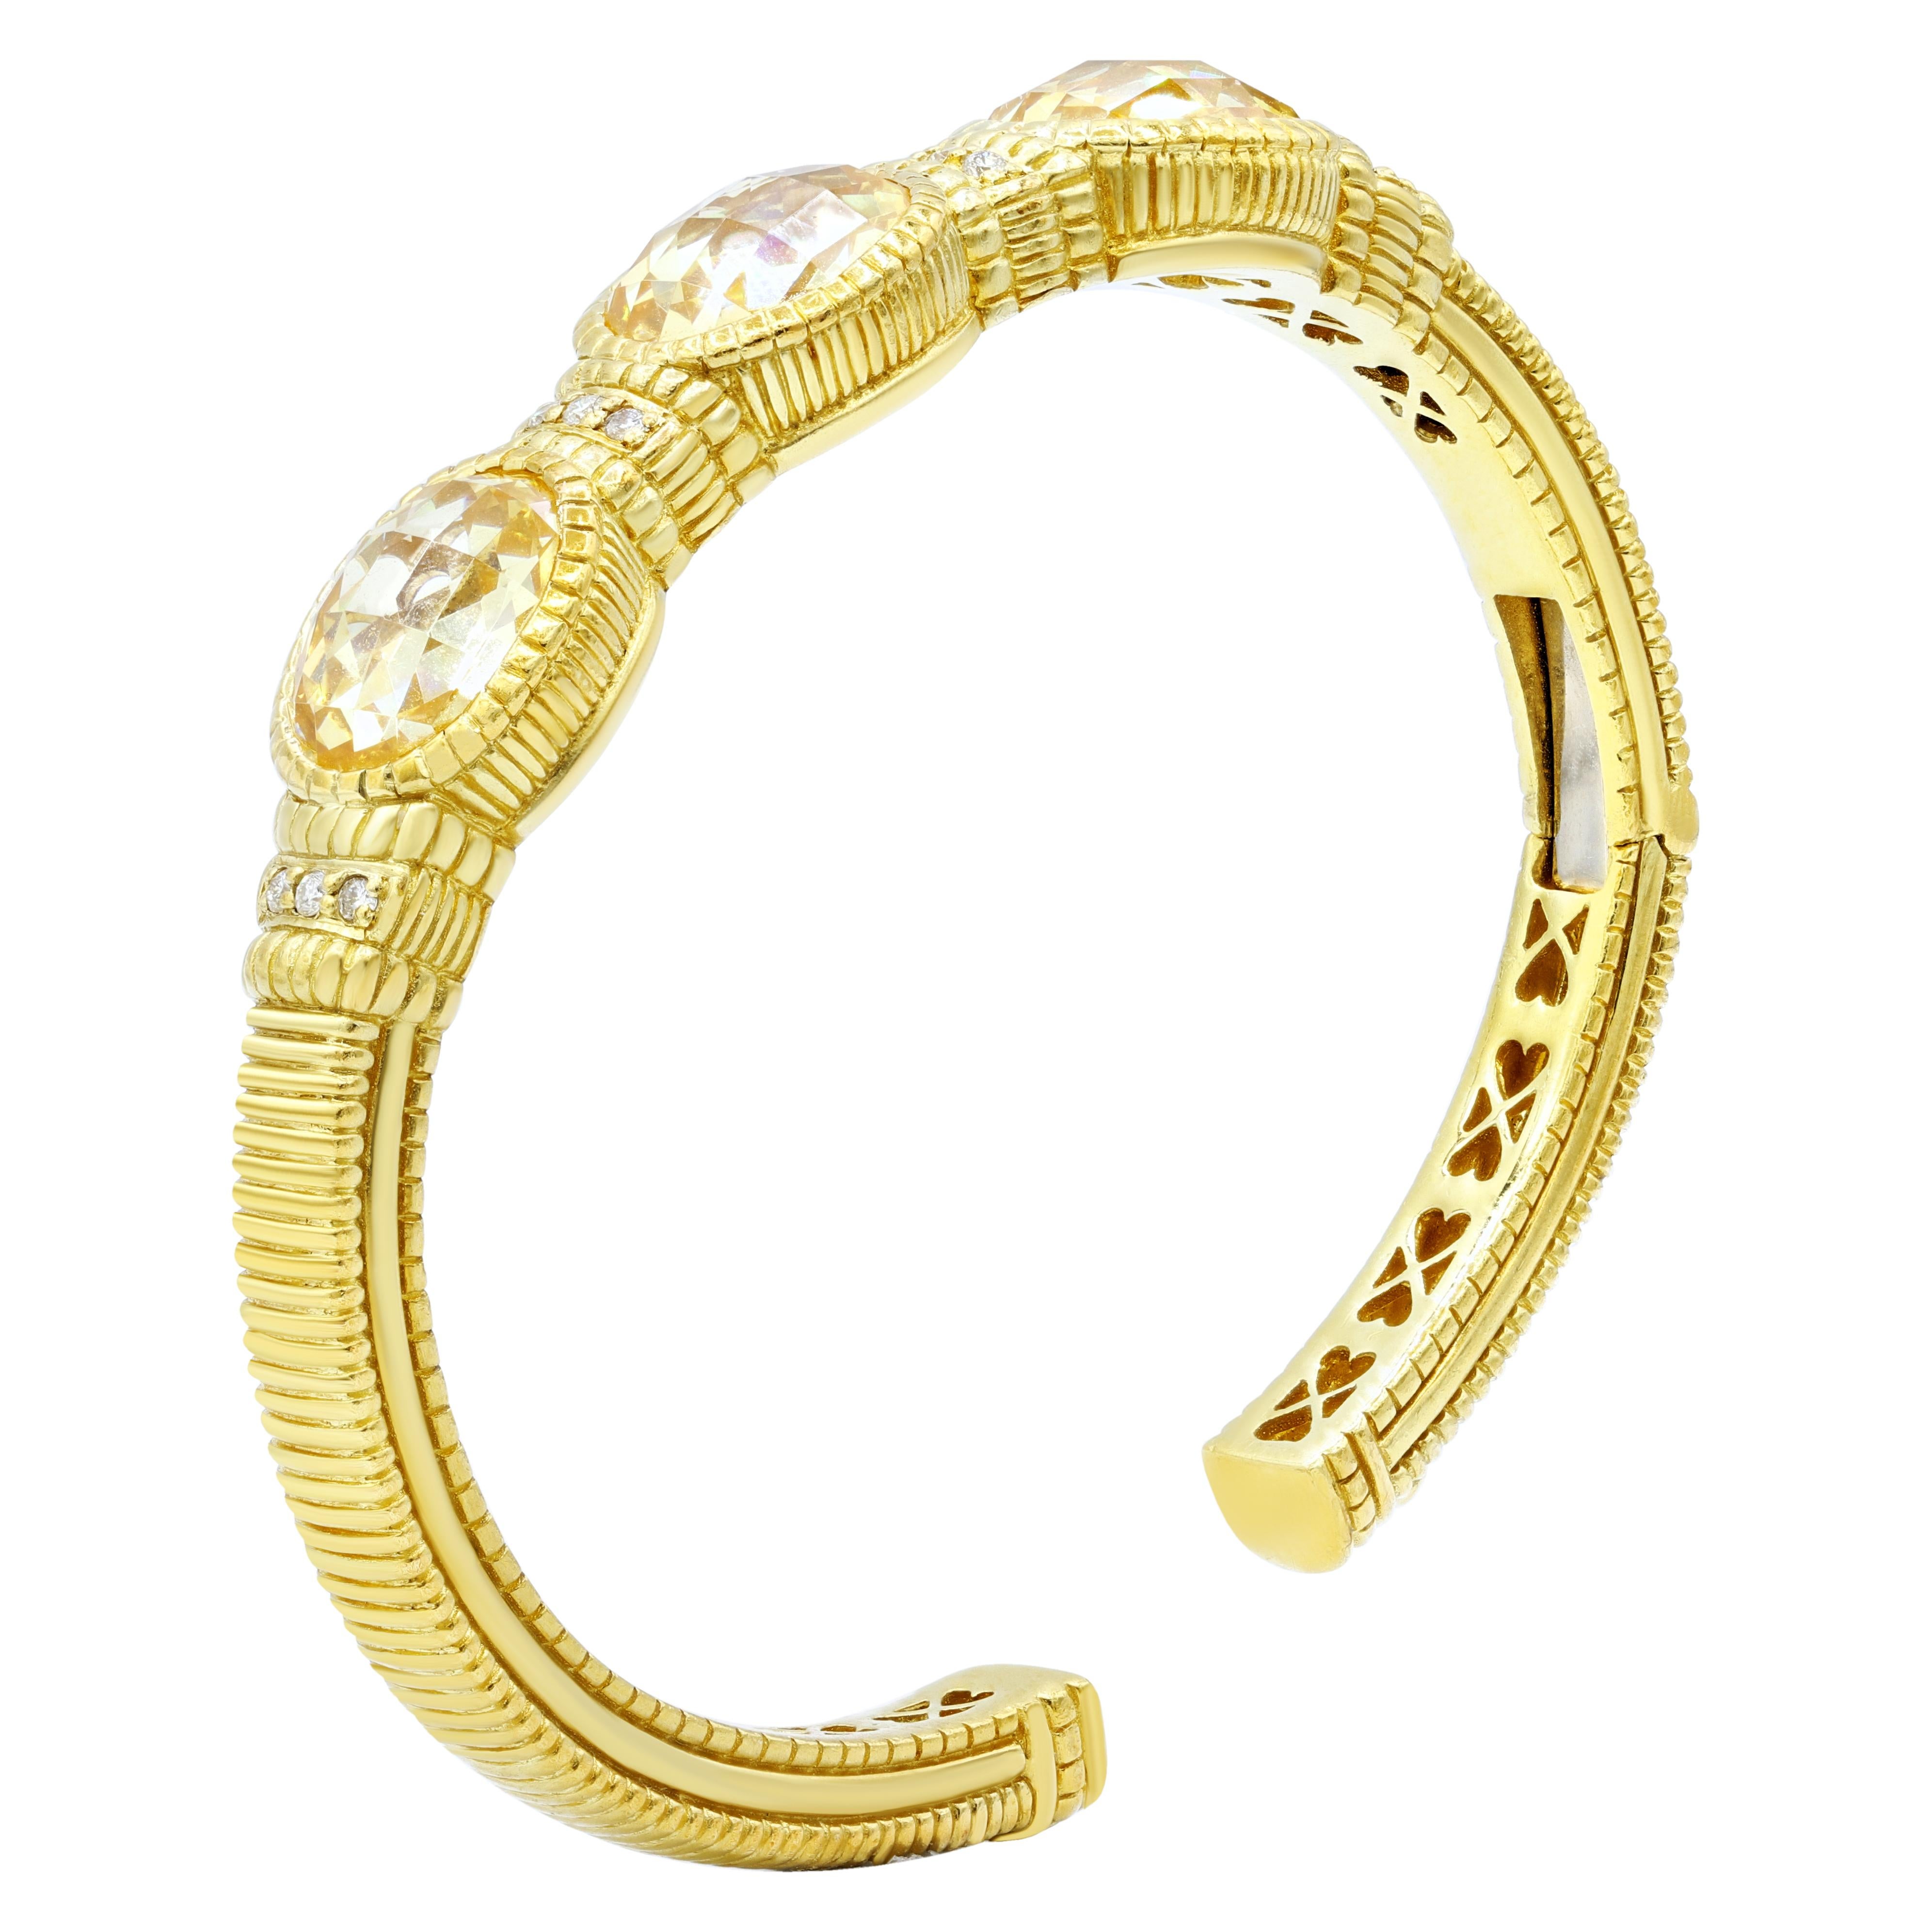 18K yellow gold bangle bracelet features 24.00 ct oval citrines and 0.60 cts of round diamonds